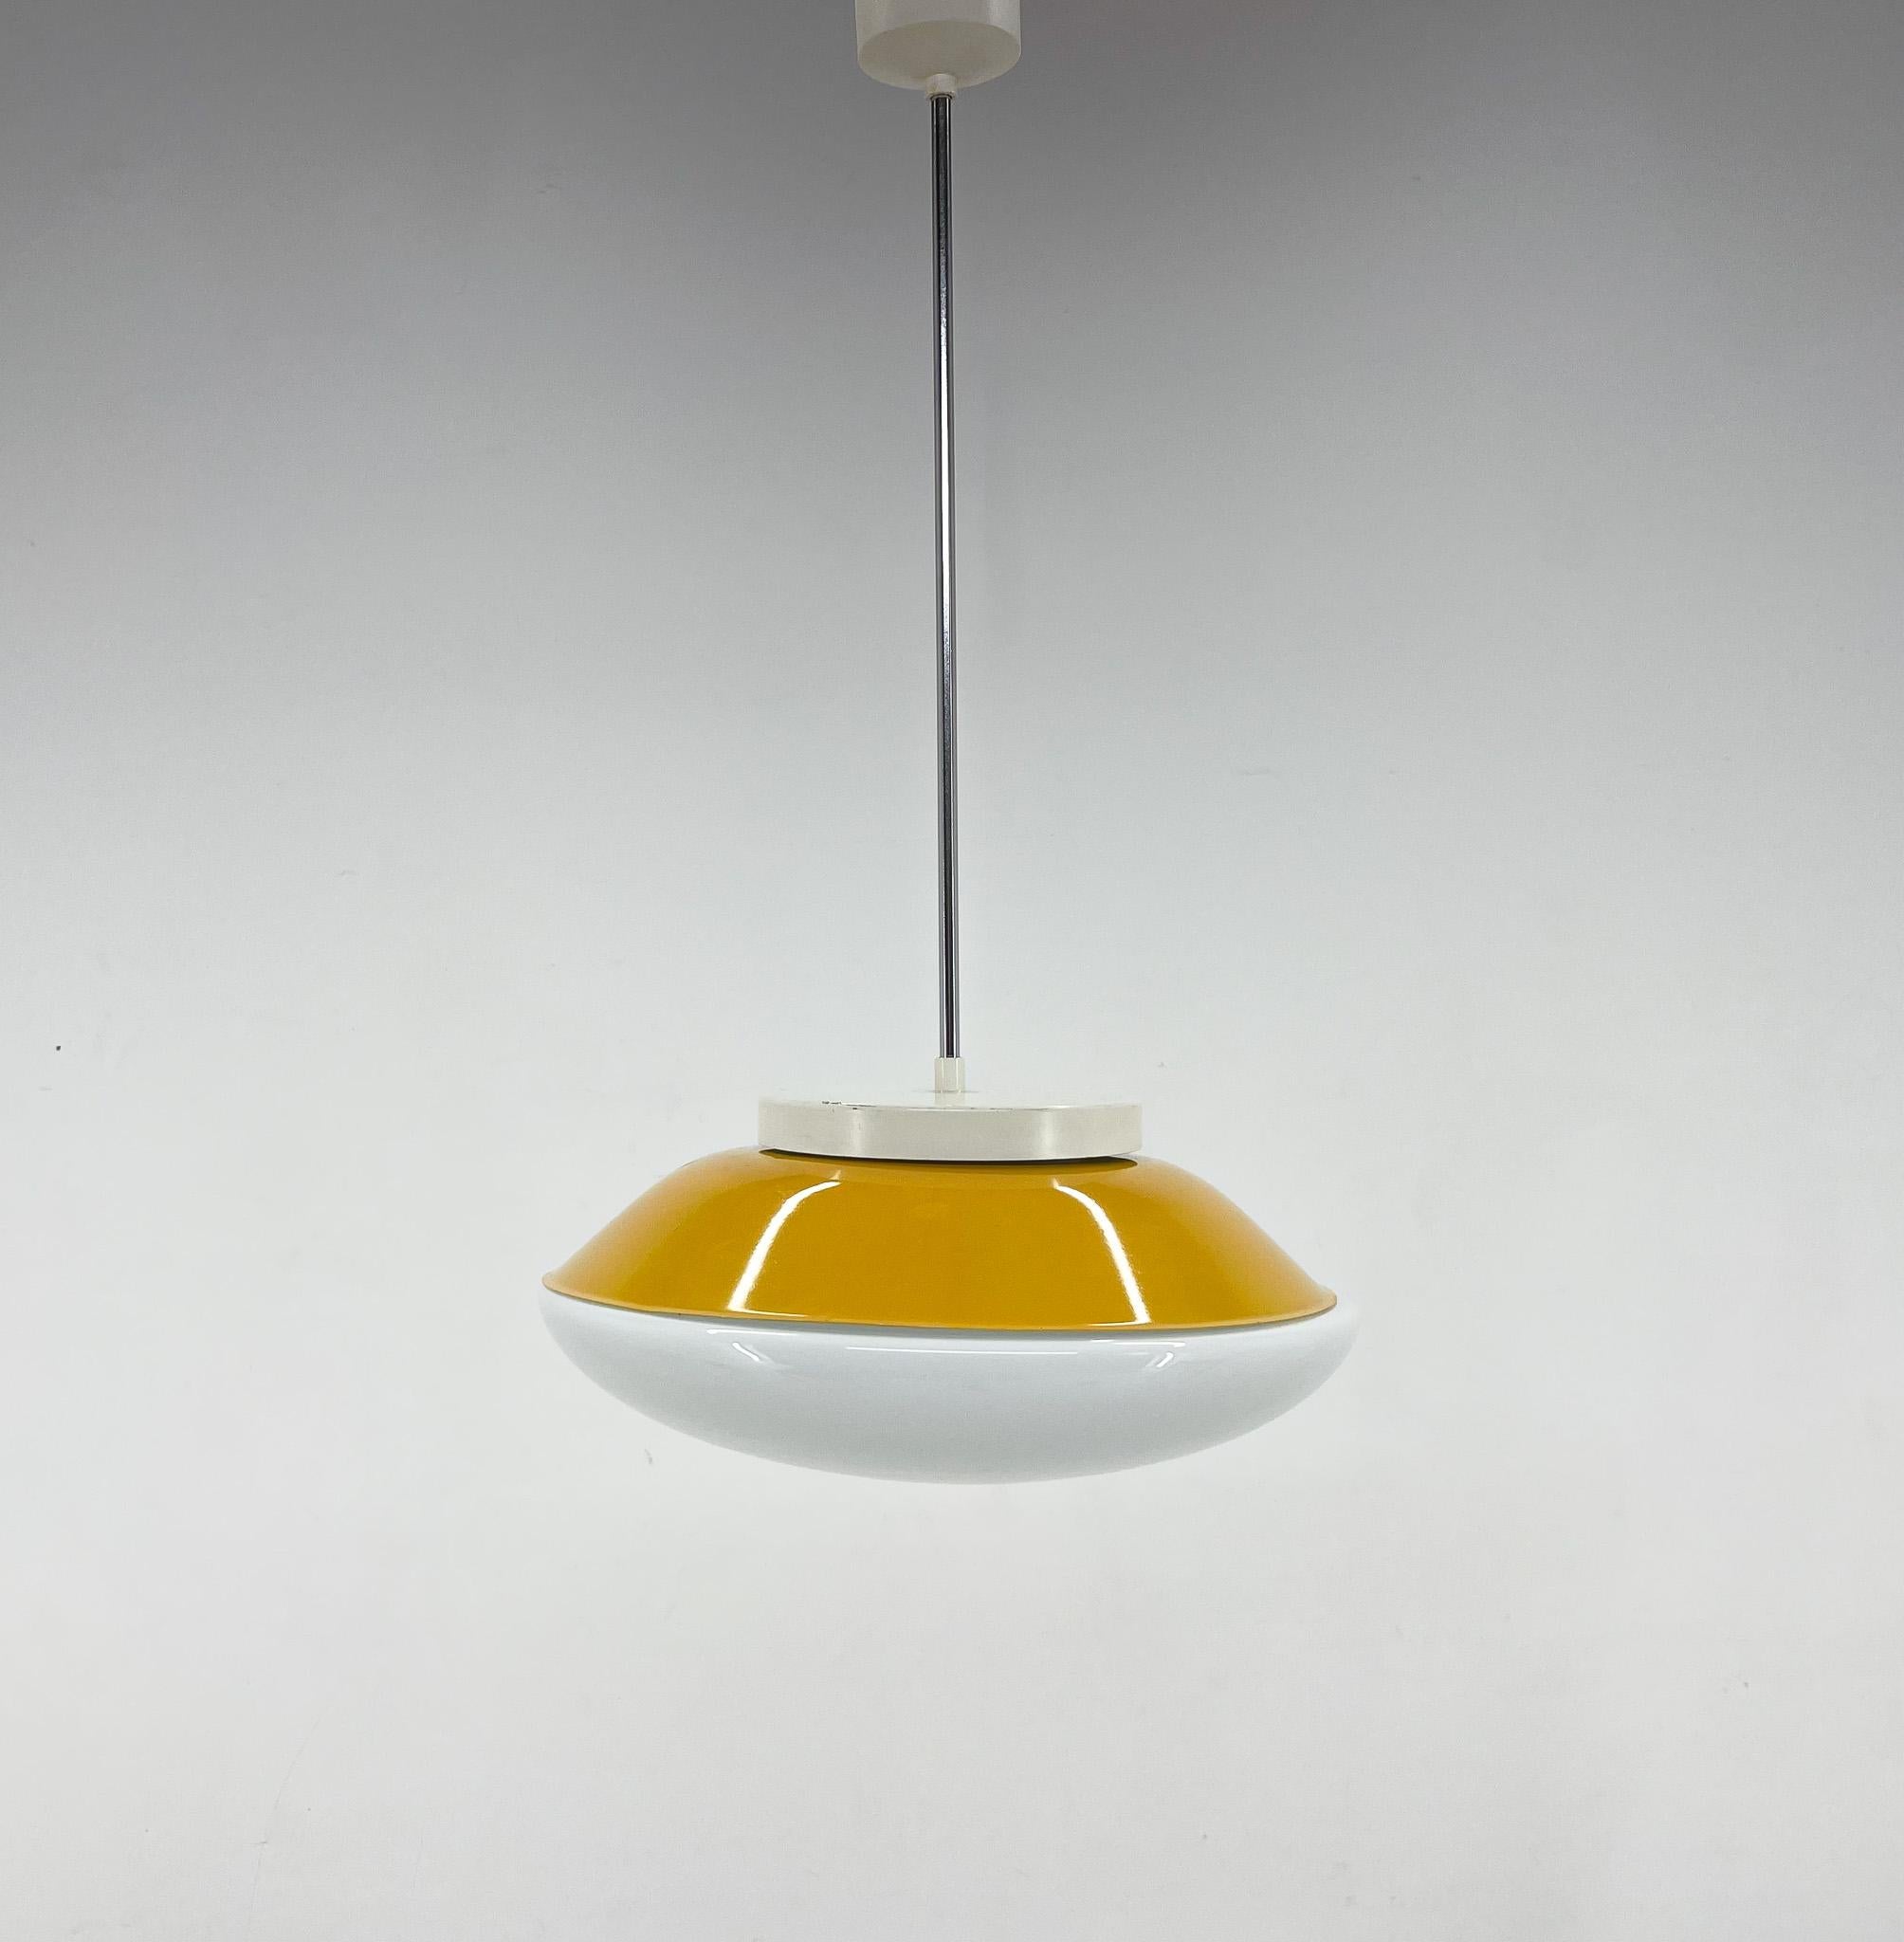 Mid-century pendant produced in former Czechoslovakia in the 1970's.